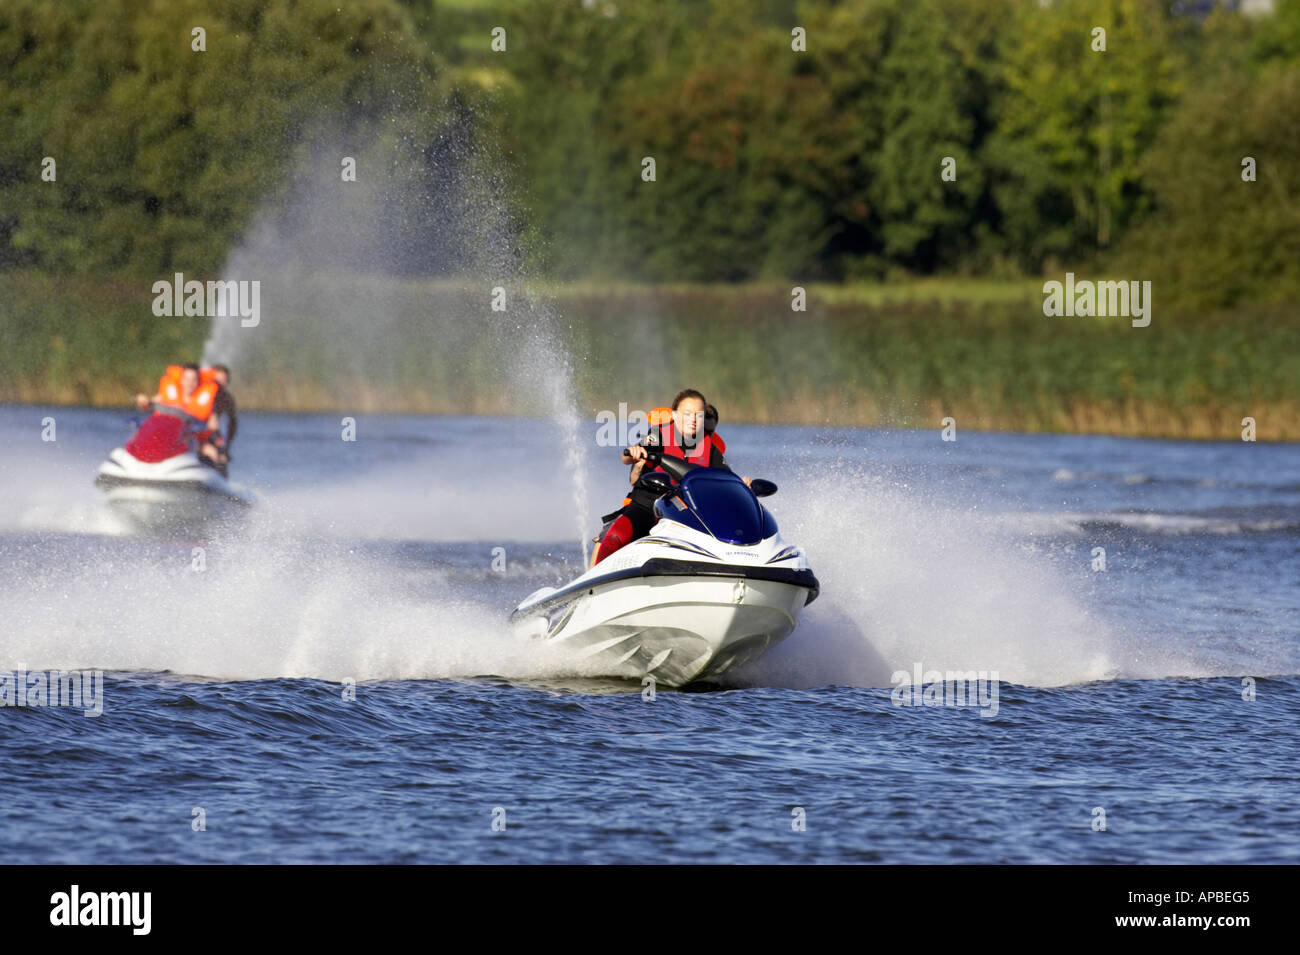 two yamaha waverunner jetskis one driven by young woman chasing each other along the river bann county antrim northern ireland Stock Photo